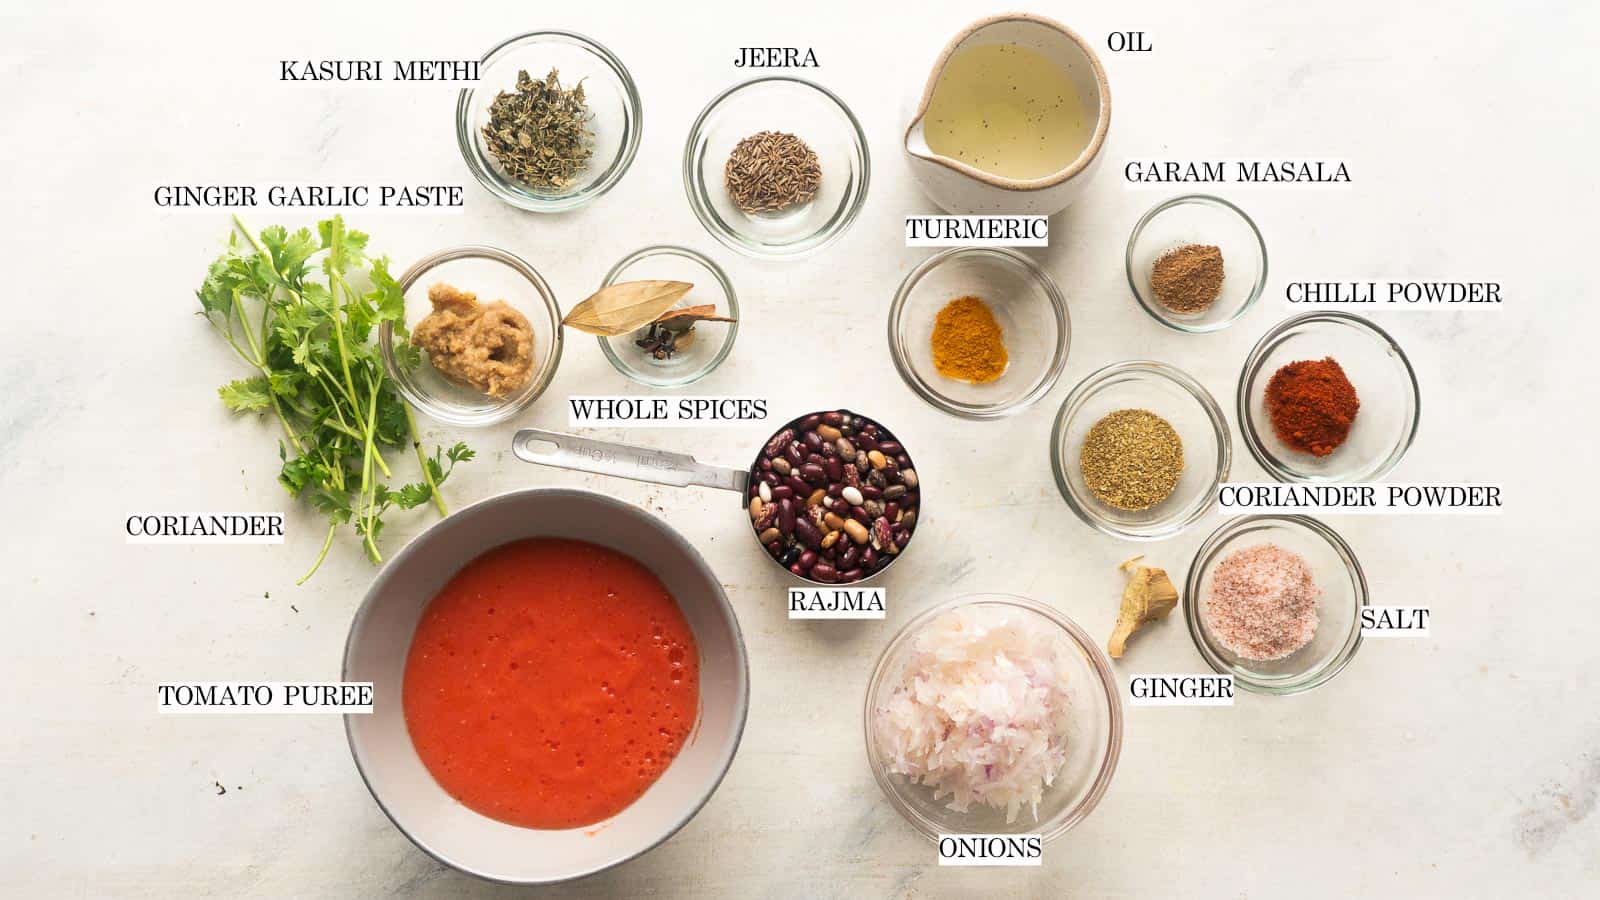 Ingredients for rajma masala pictured with text identifying each ingredient